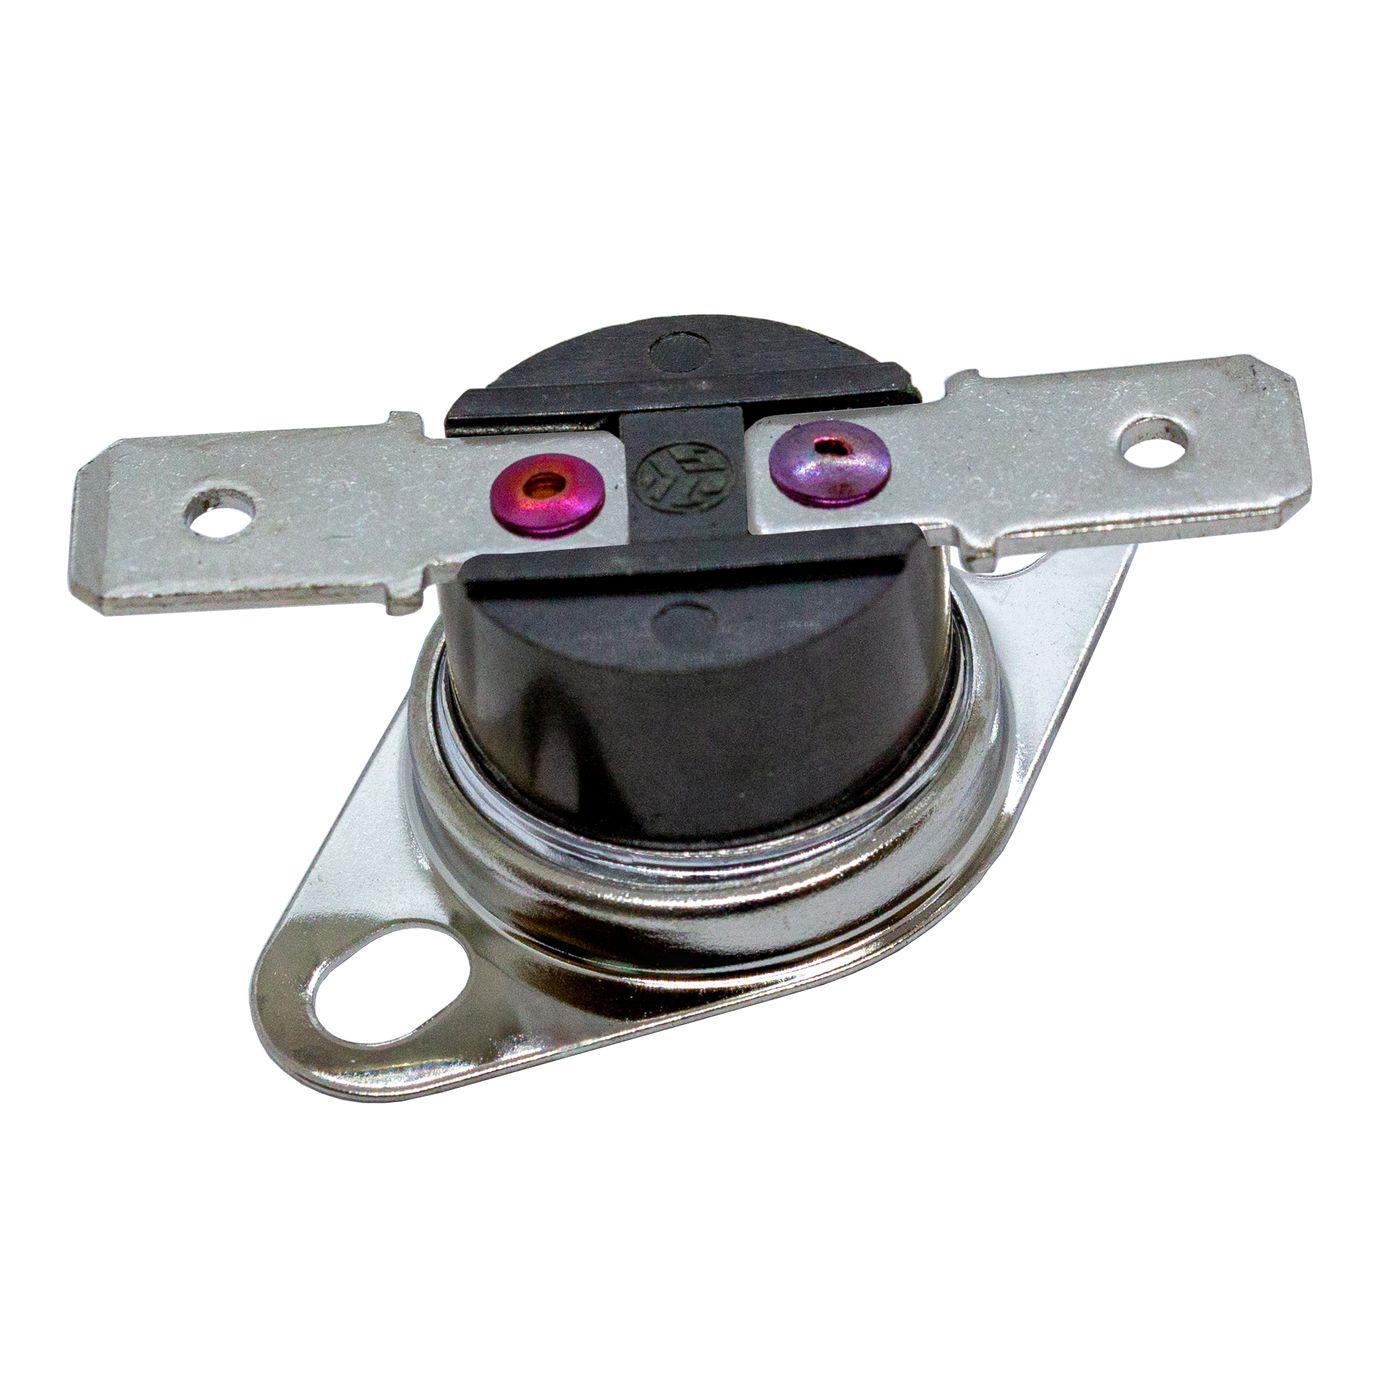 Thermal switch 55°C NC contact 250V 10A Temperature switch thermostat KSD301 Bimetal Thermal protection